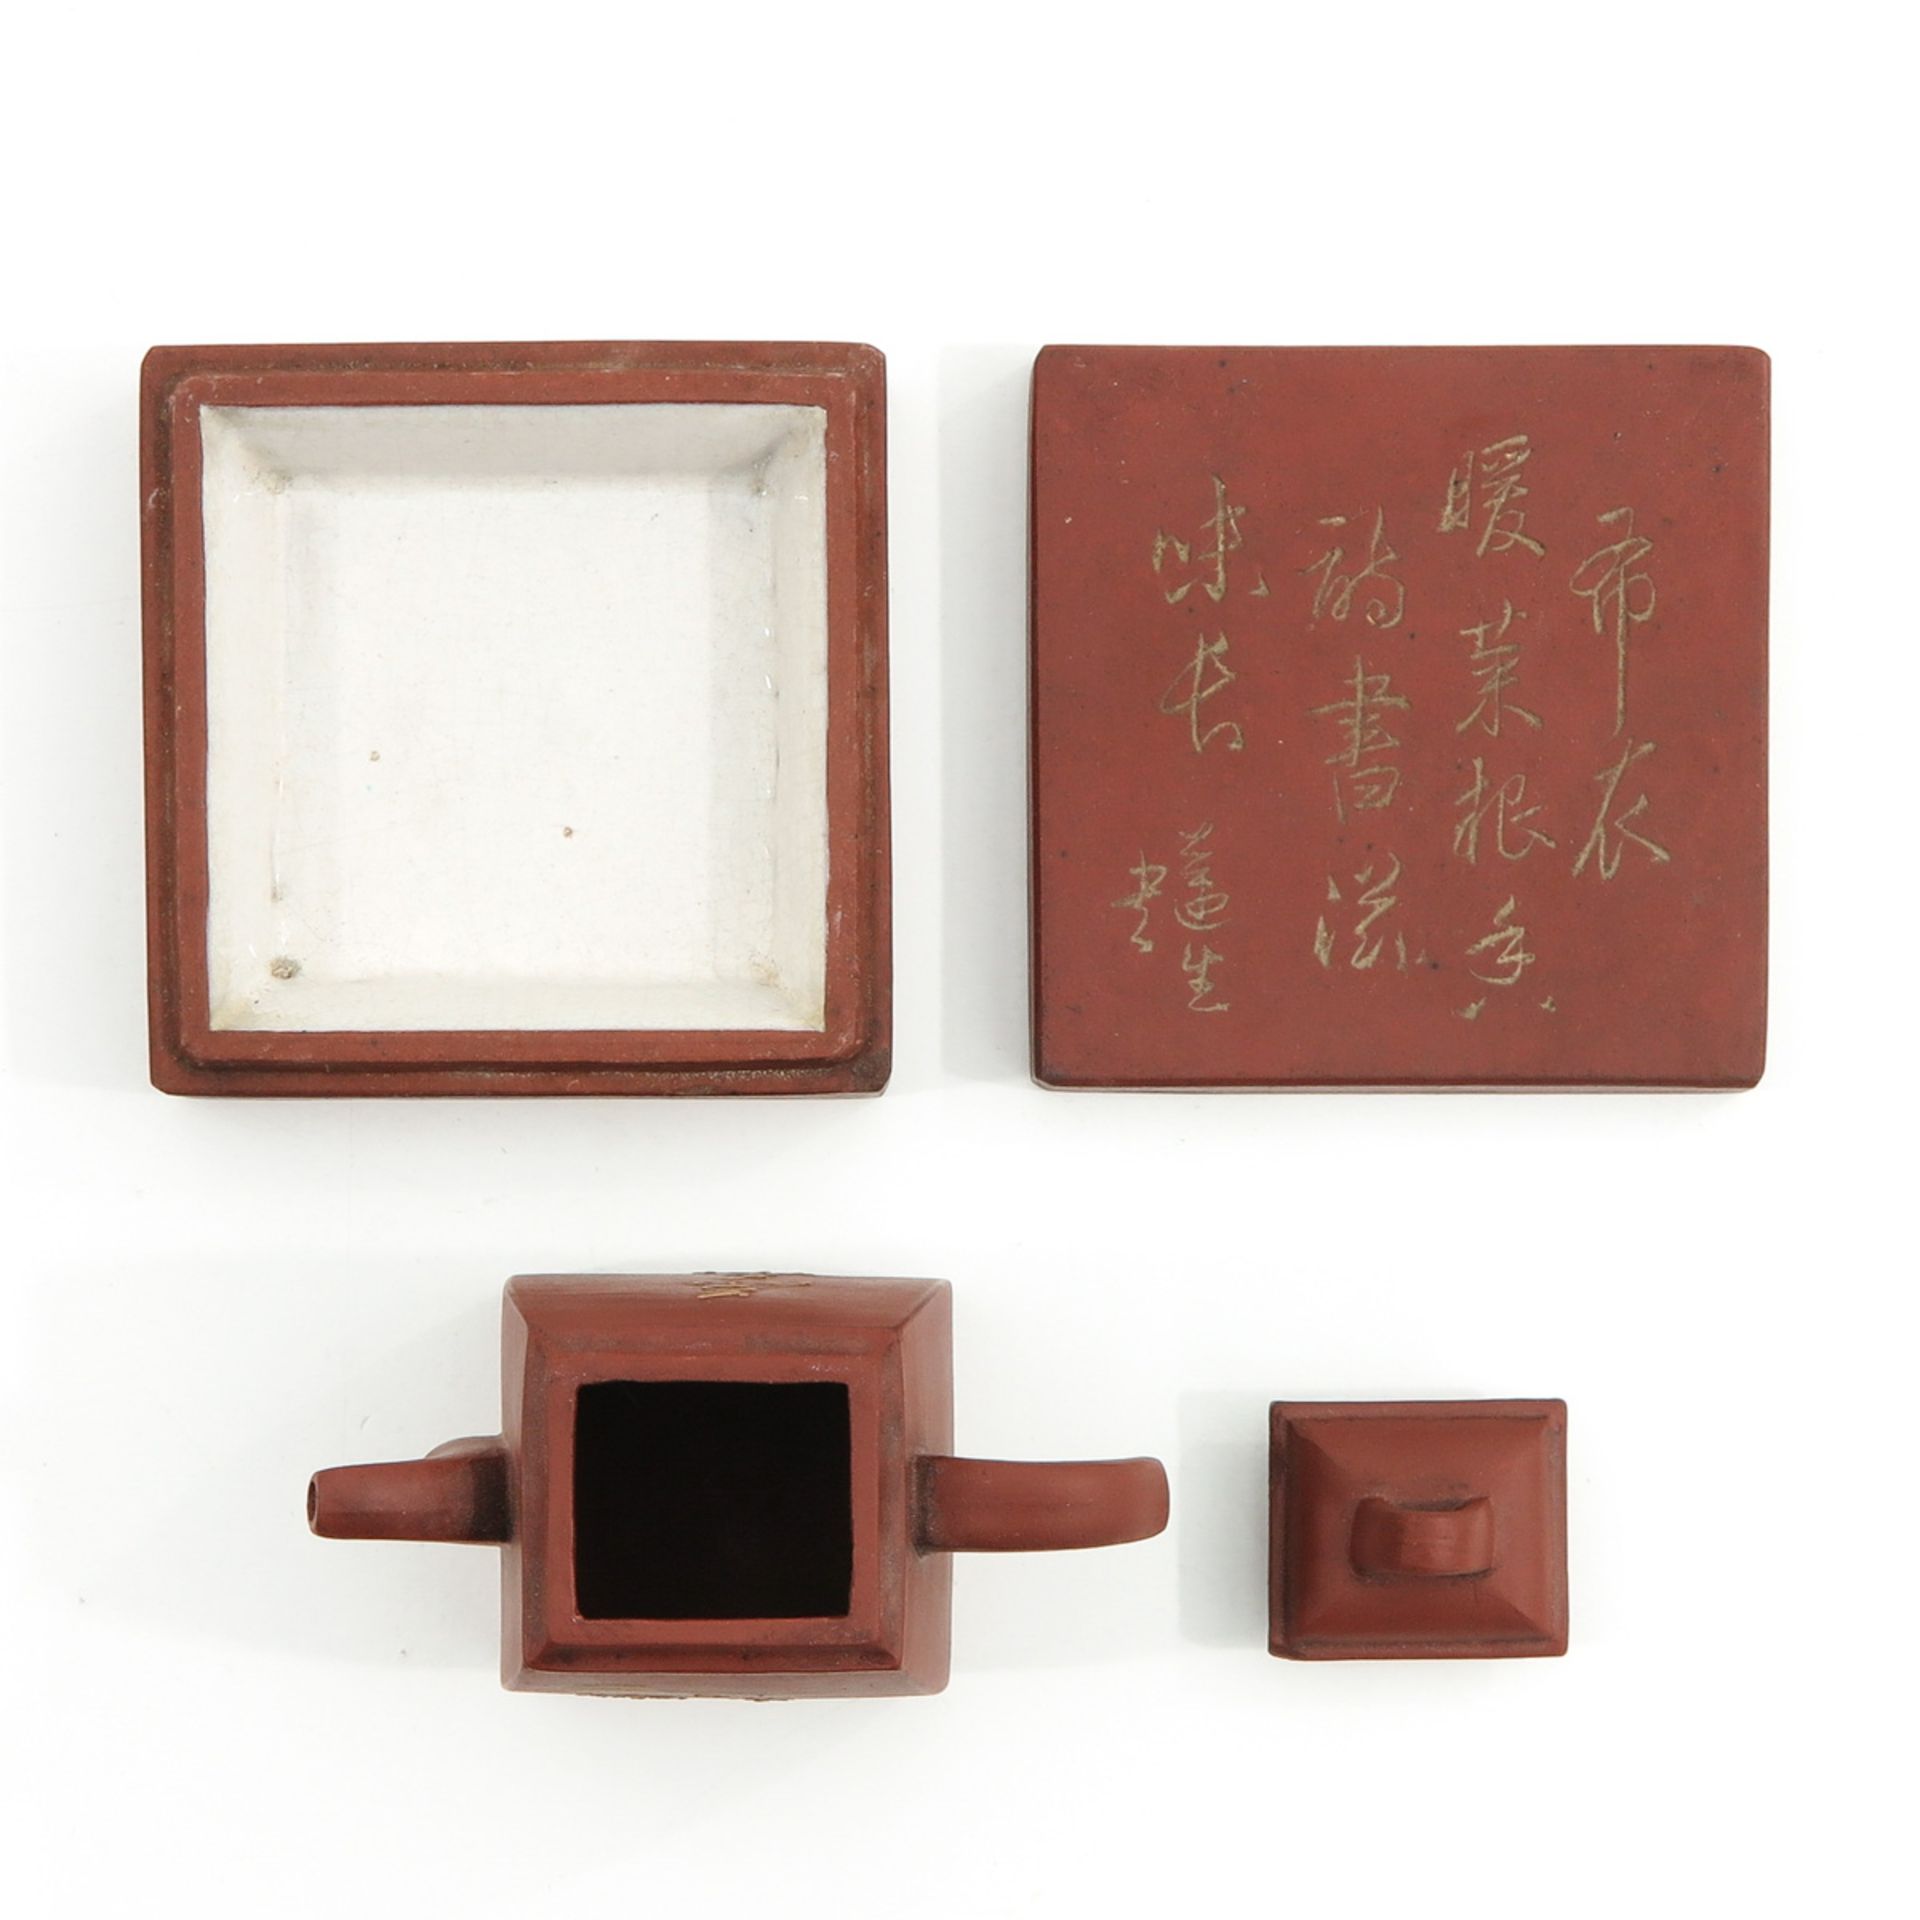 A Yixing Teapot and Box - Image 5 of 10